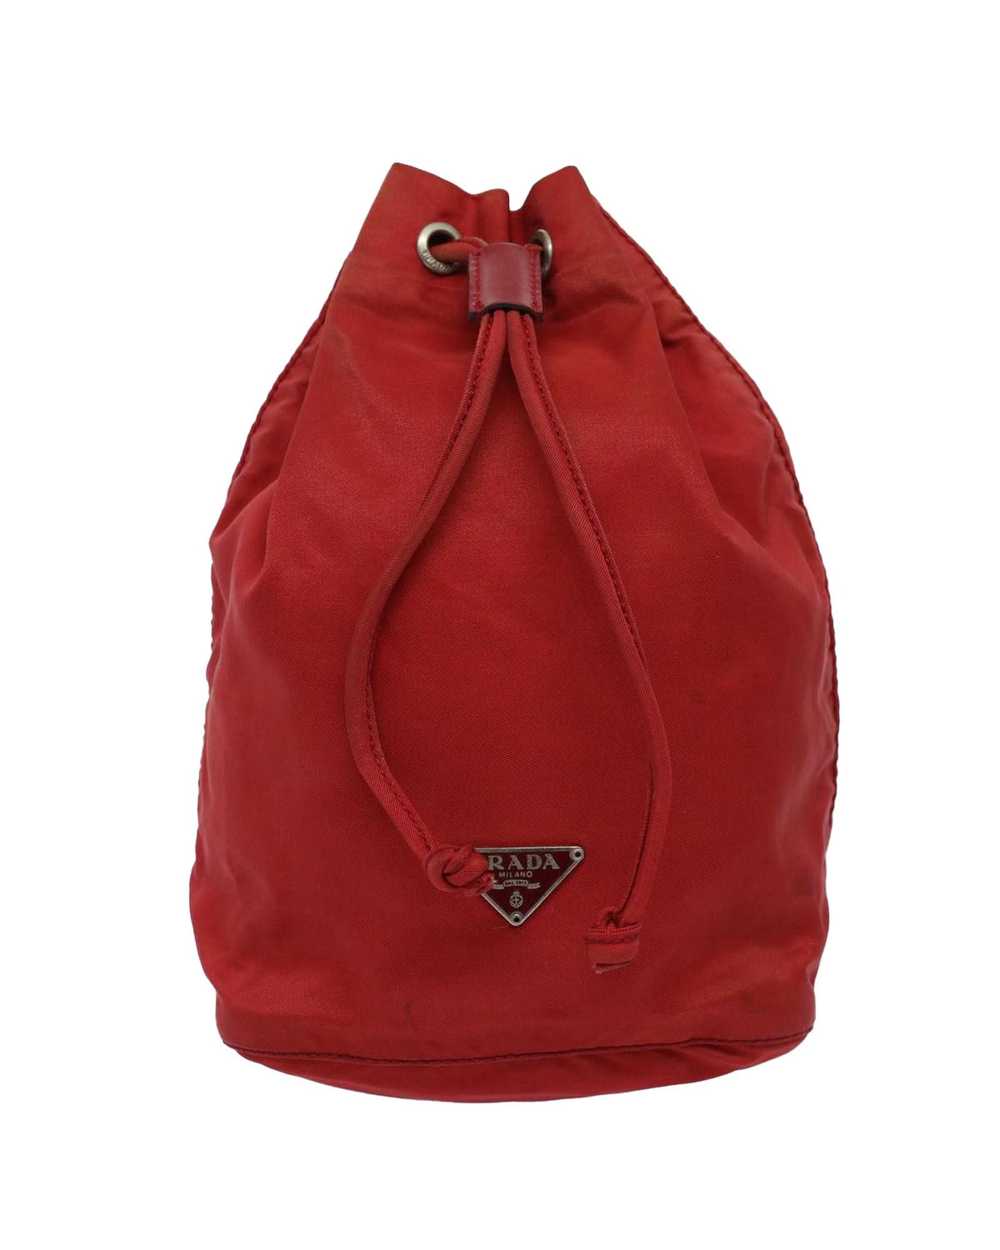 Prada Luxury Red Synthetic Bag - AB Condition - image 2